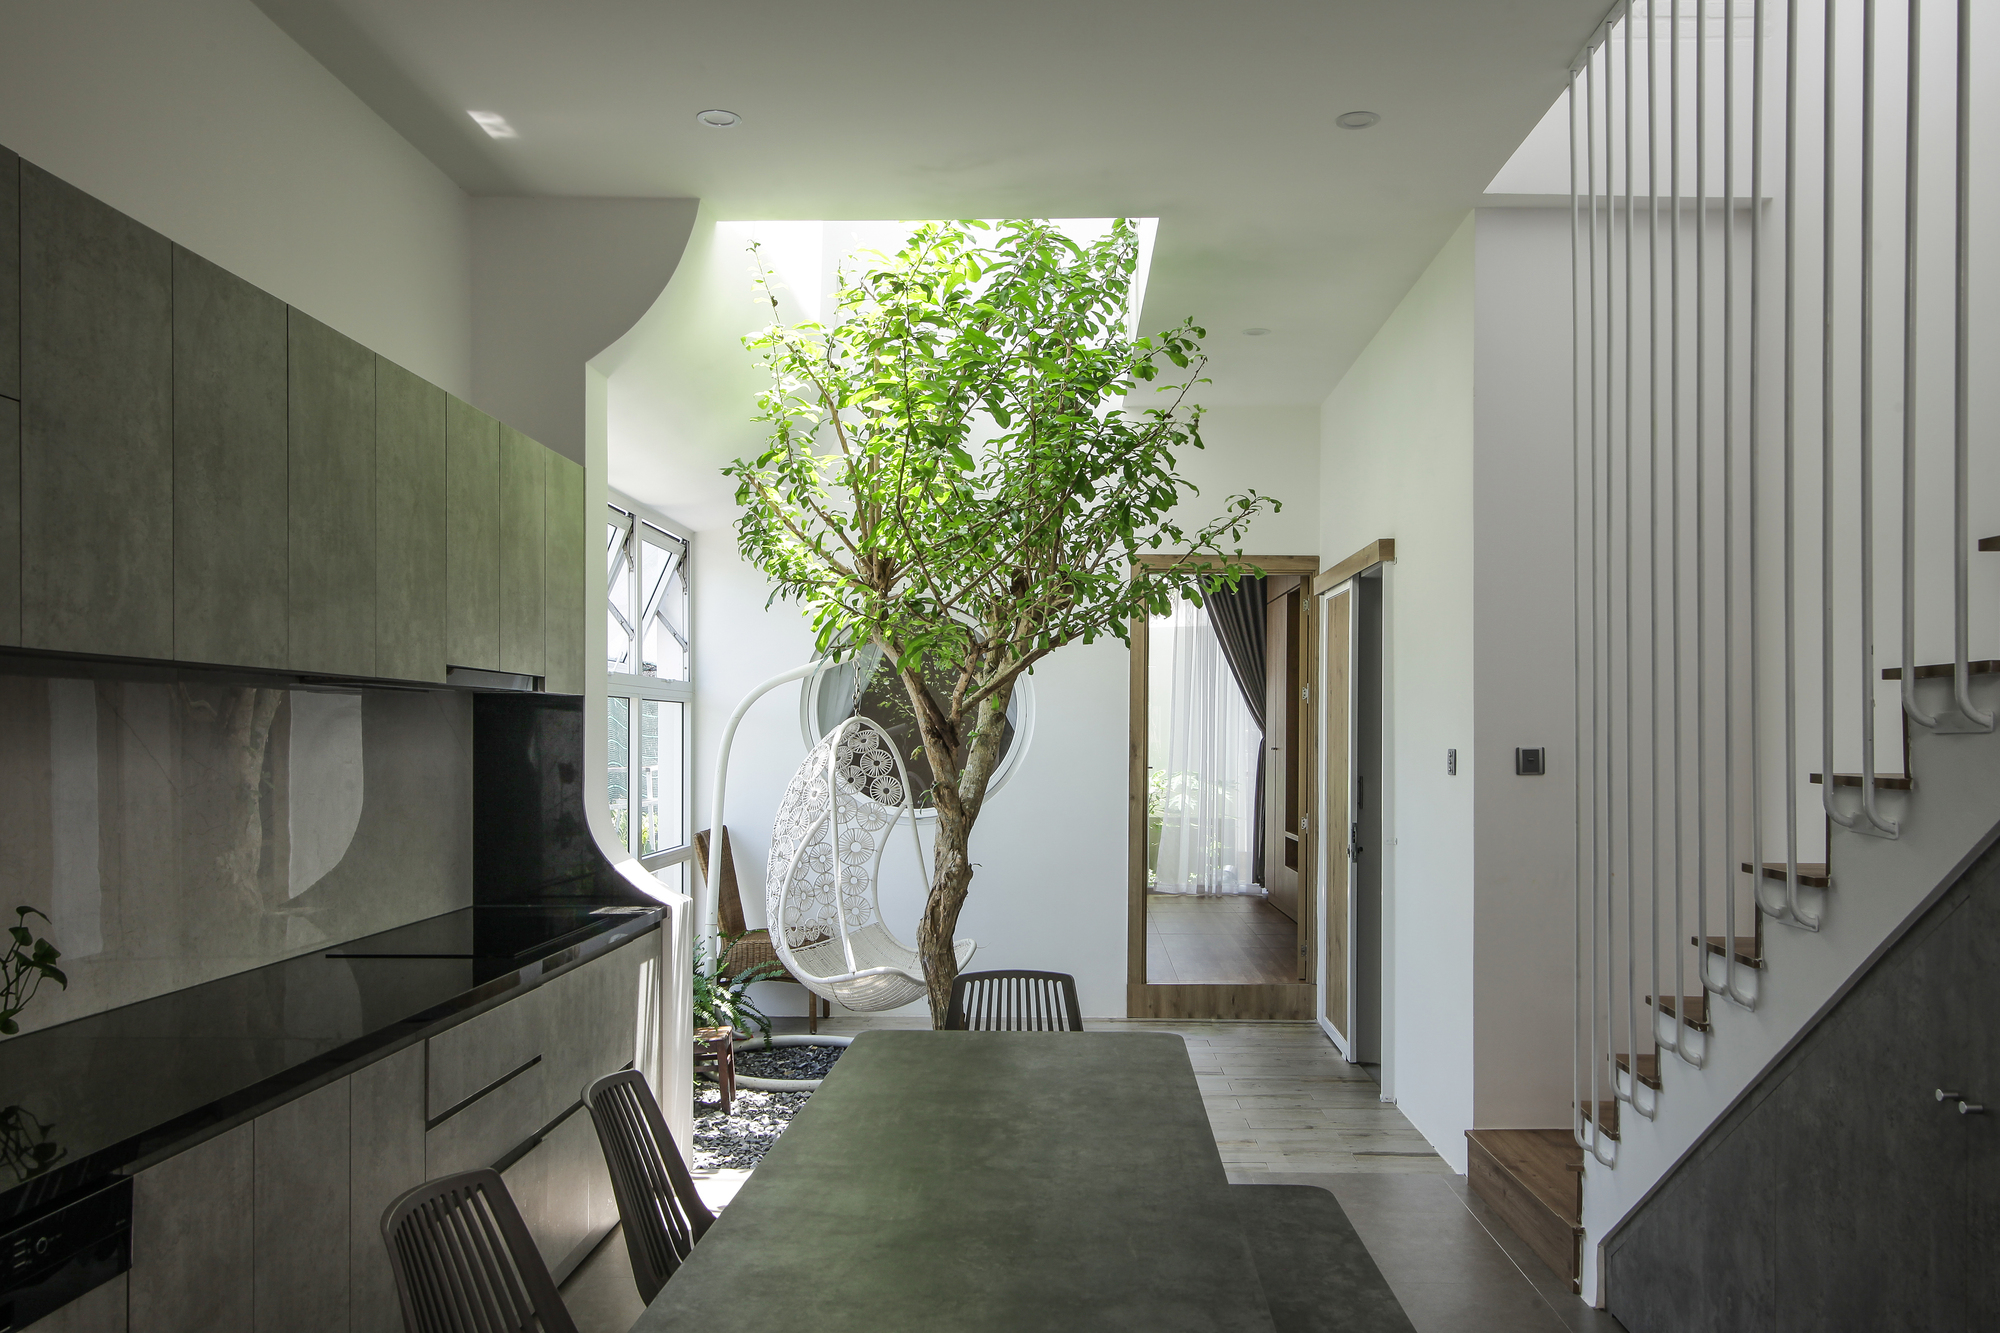 Next to the kitchen and dining room is a relaxing area with trees towering towards the skylights